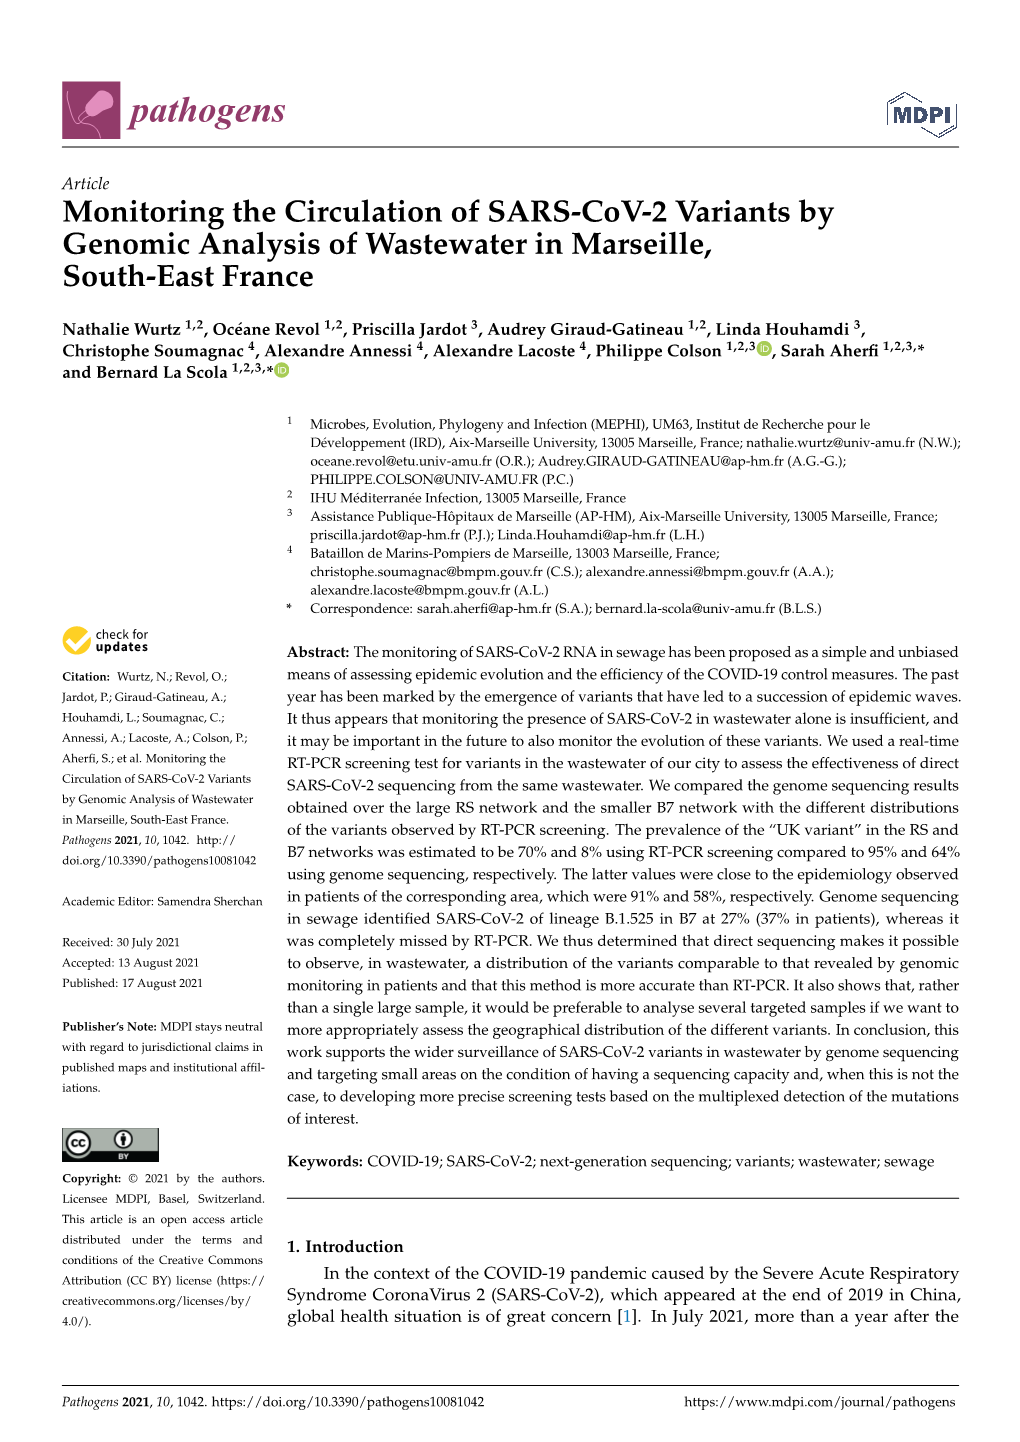 Monitoring the Circulation of SARS-Cov-2 Variants by Genomic Analysis of Wastewater in Marseille, South-East France